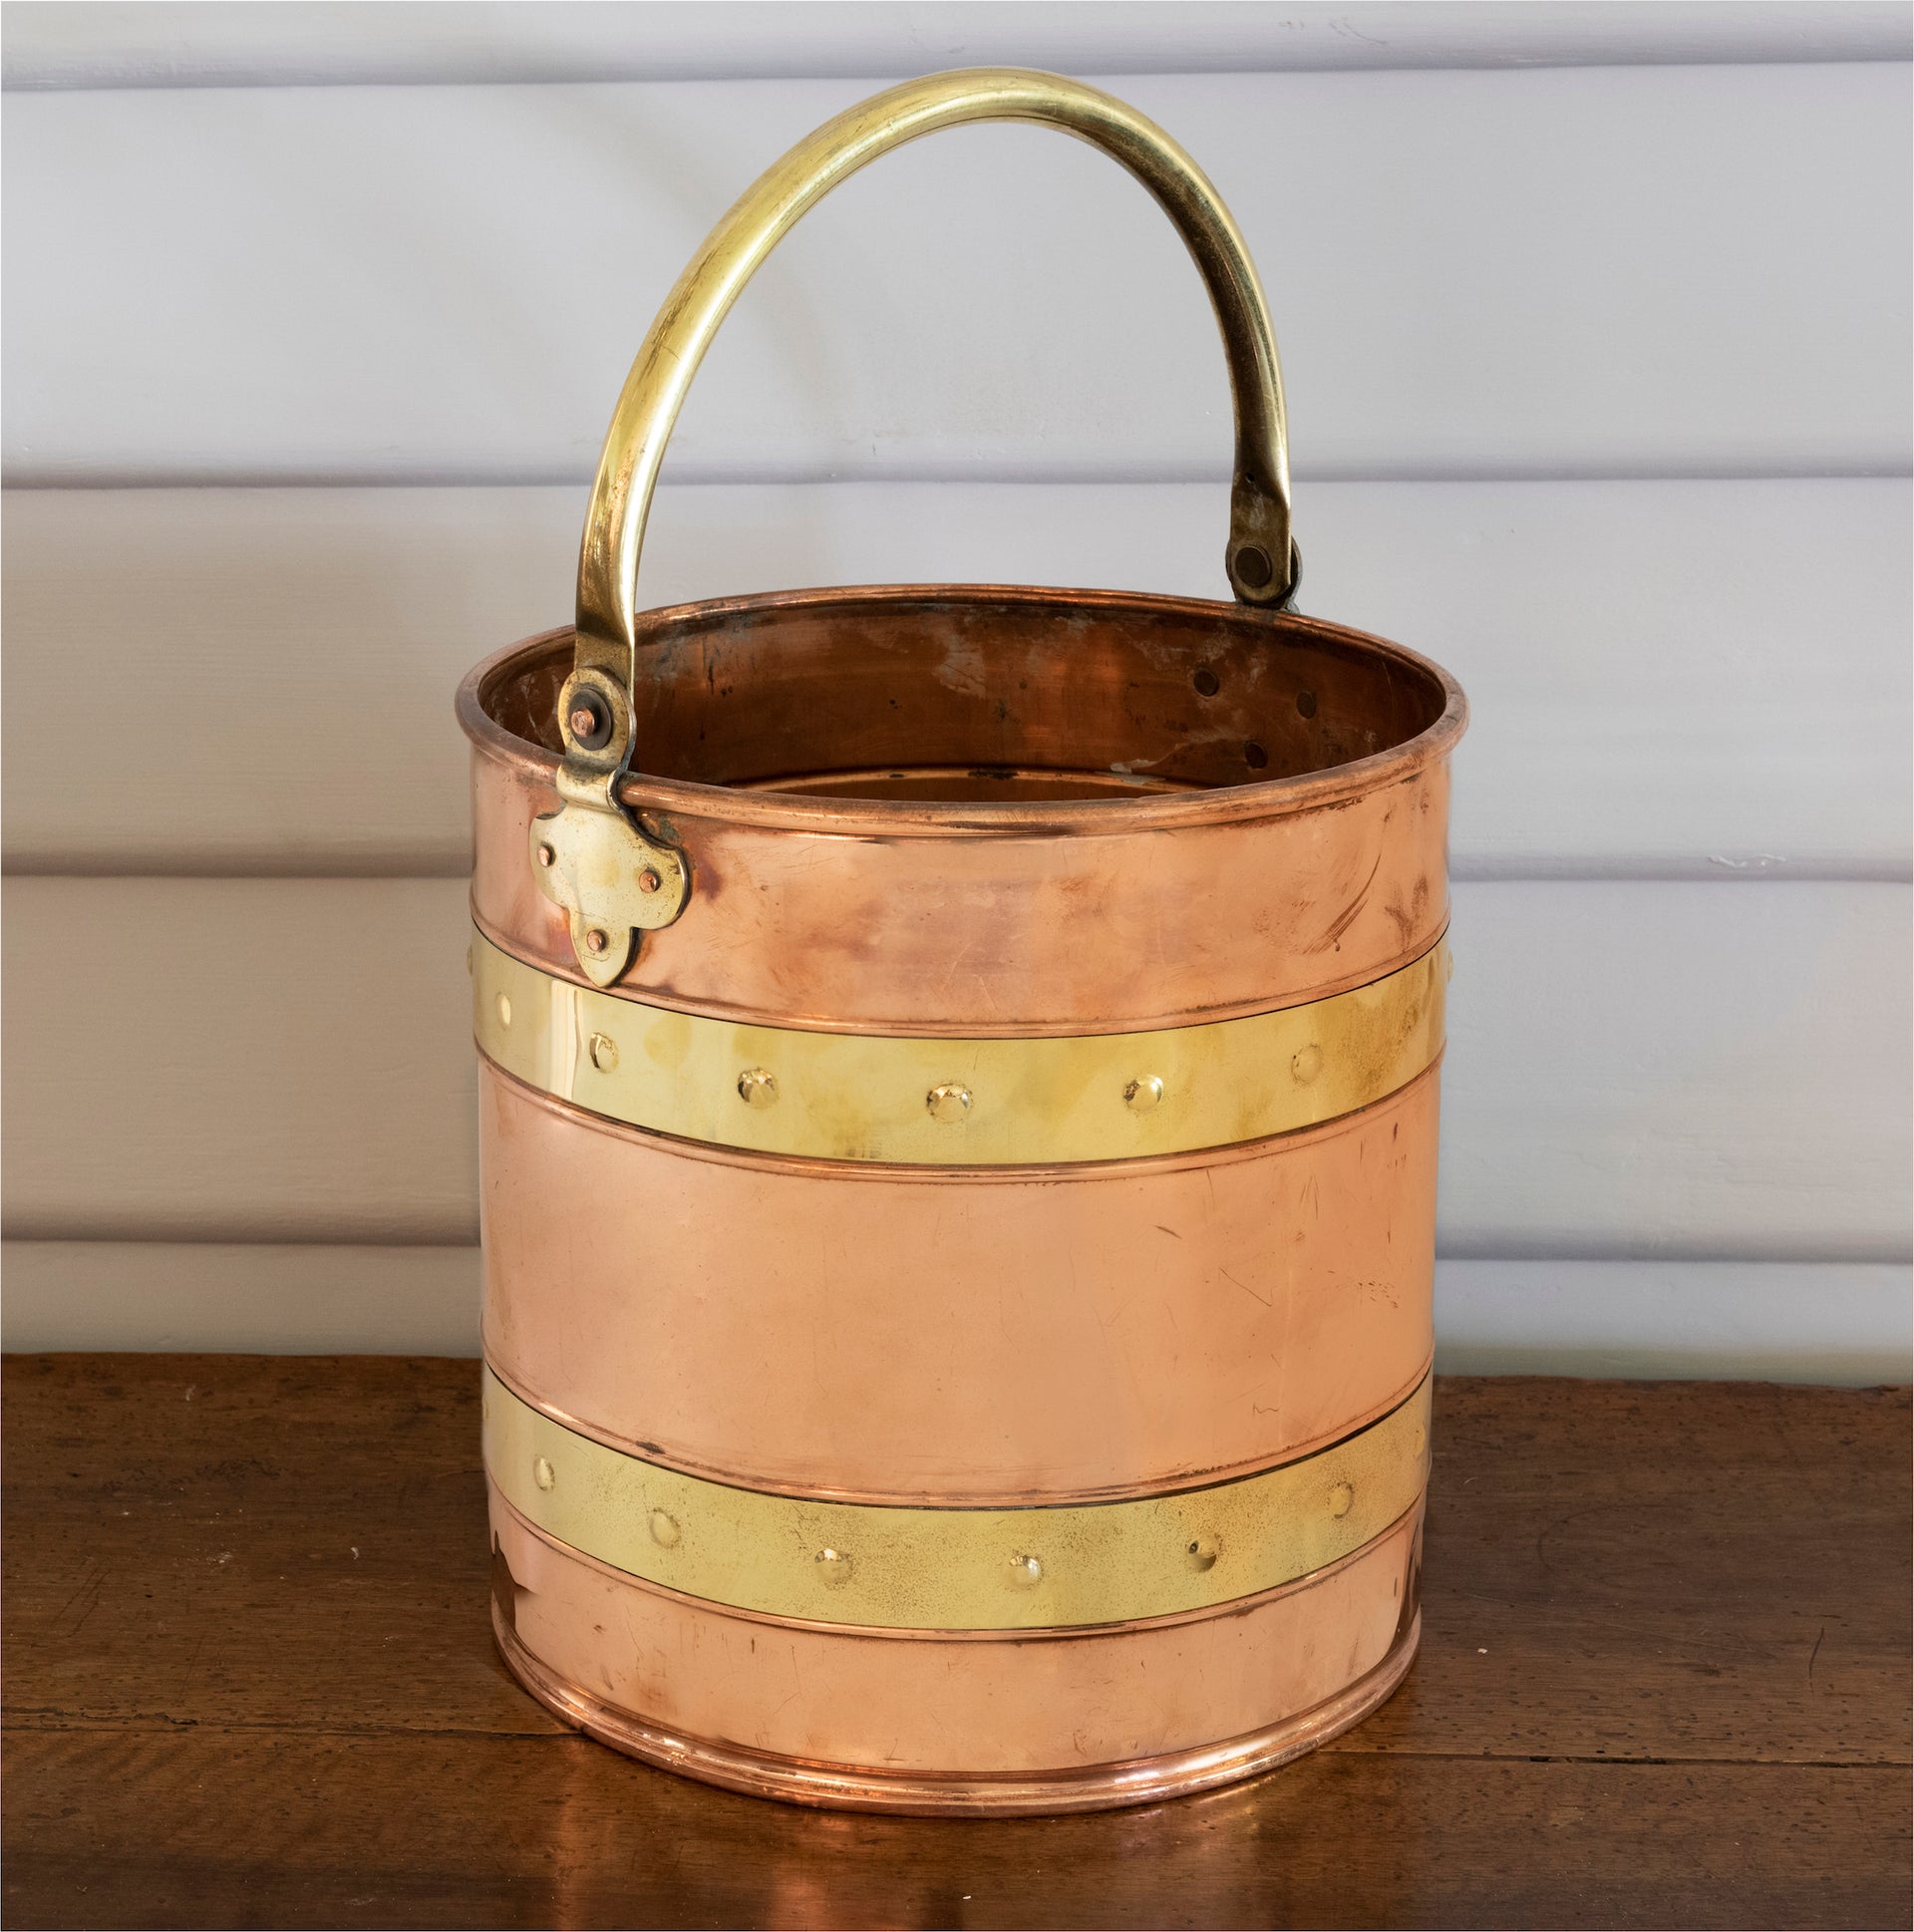 SOLD A copper and brass banded bucket with brass handle, French 19th Century